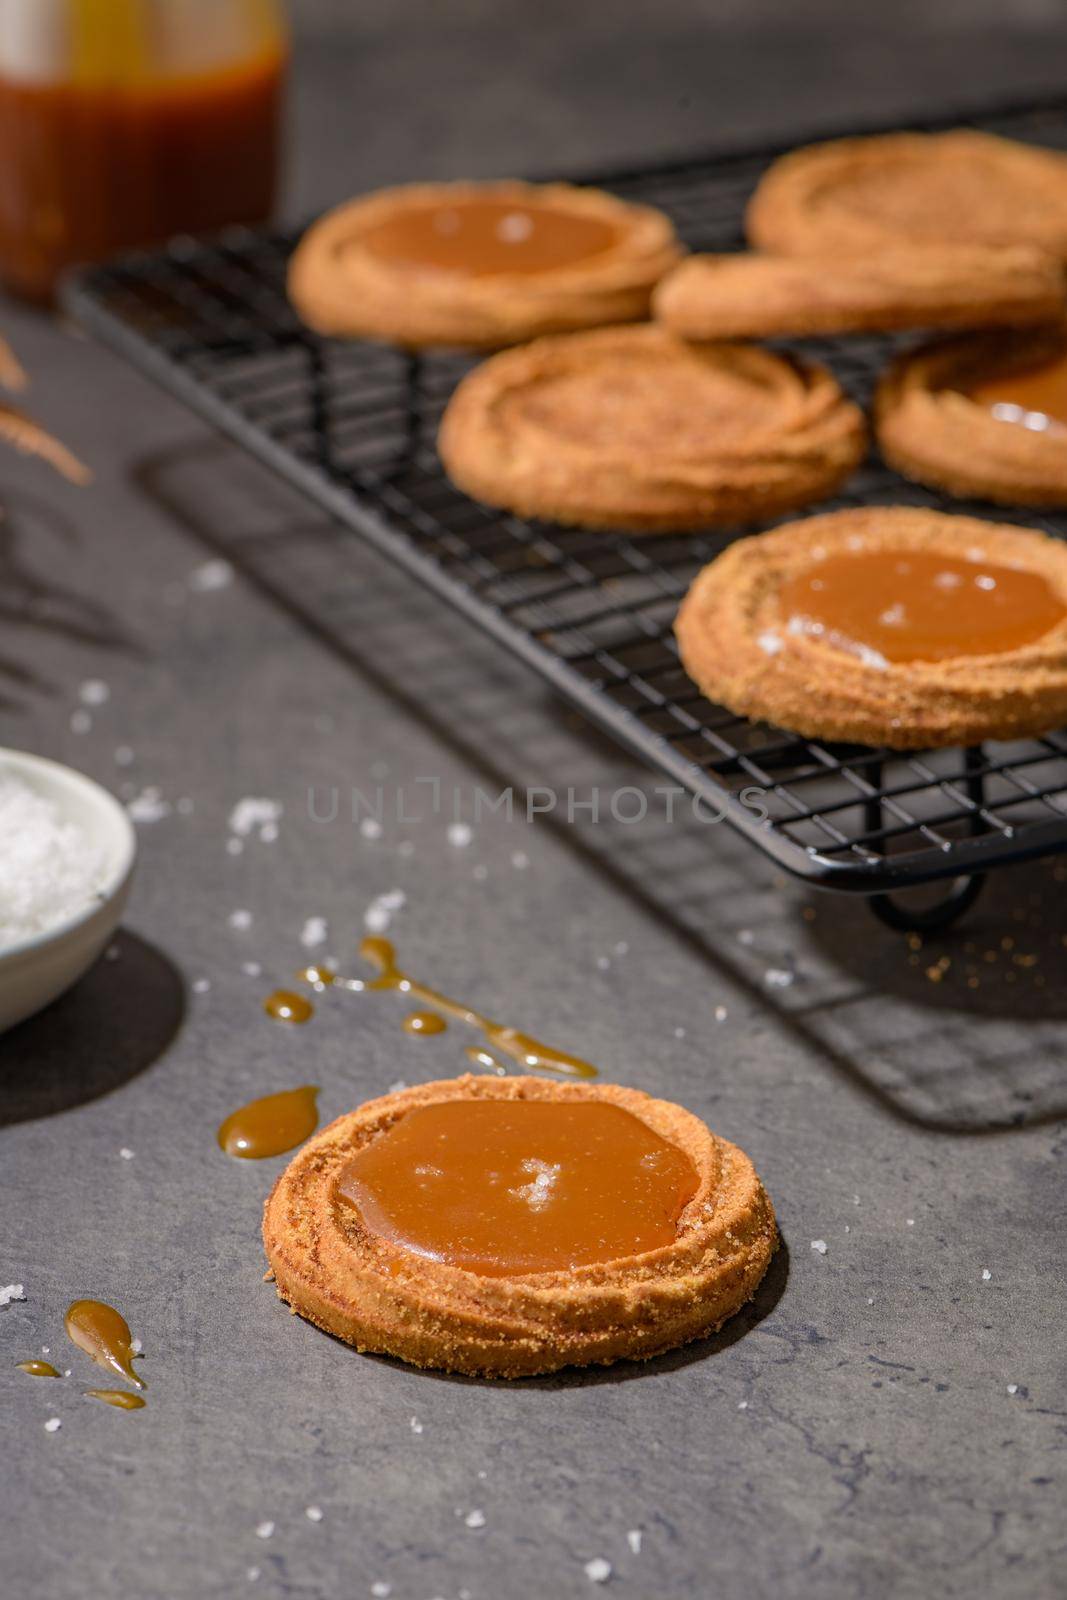 Caramel cookies flowing out of the oven, in the kitchen after baking.